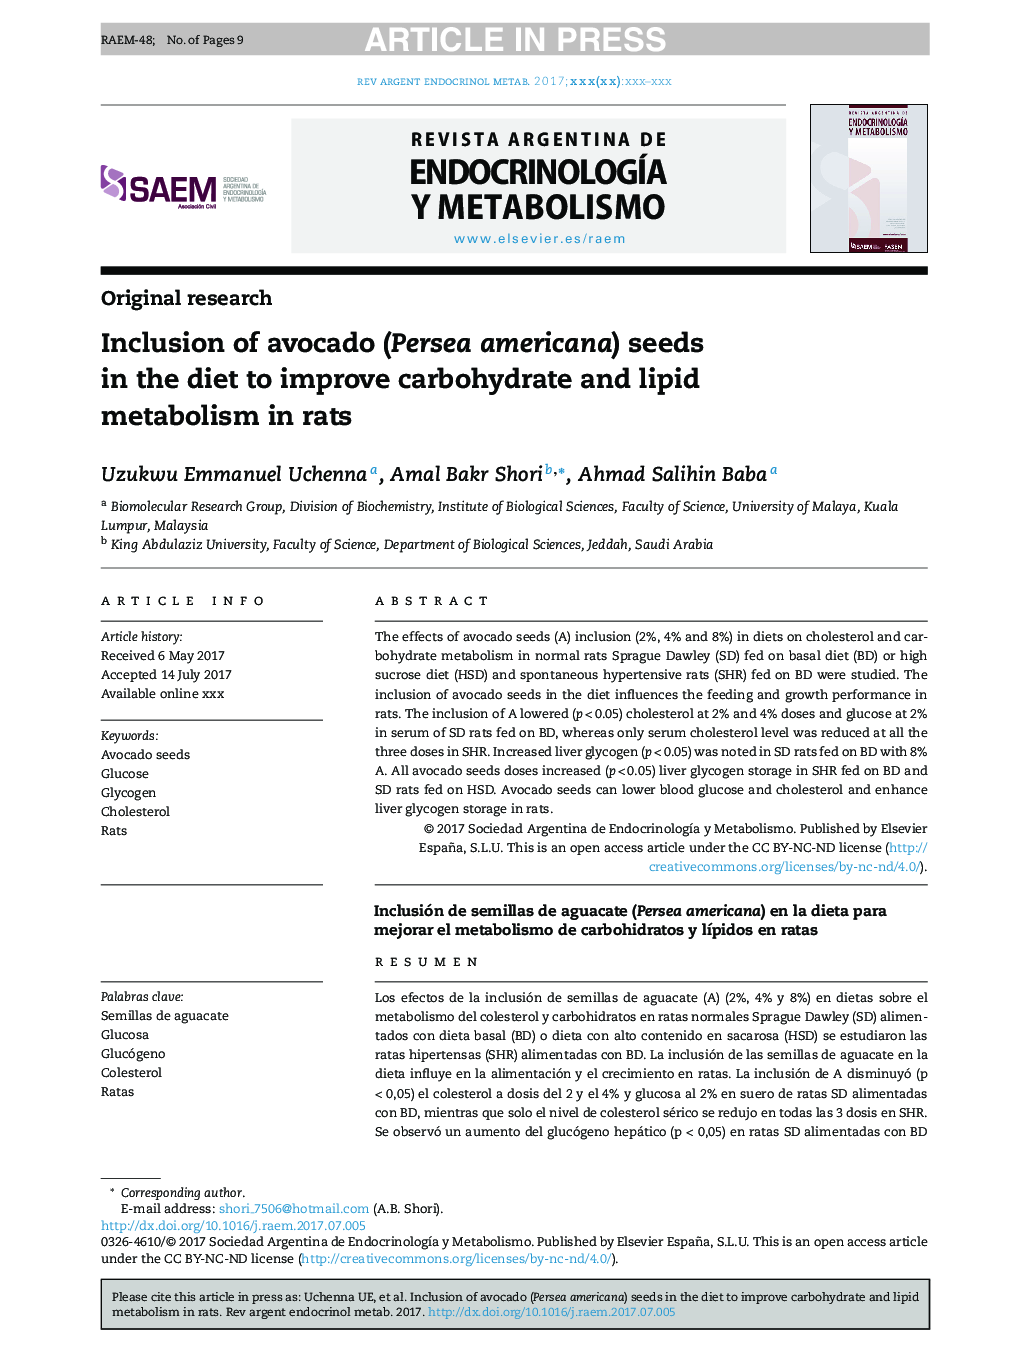 Inclusion of avocado (Persea americana) seeds in the diet to improve carbohydrate and lipid metabolism in rats